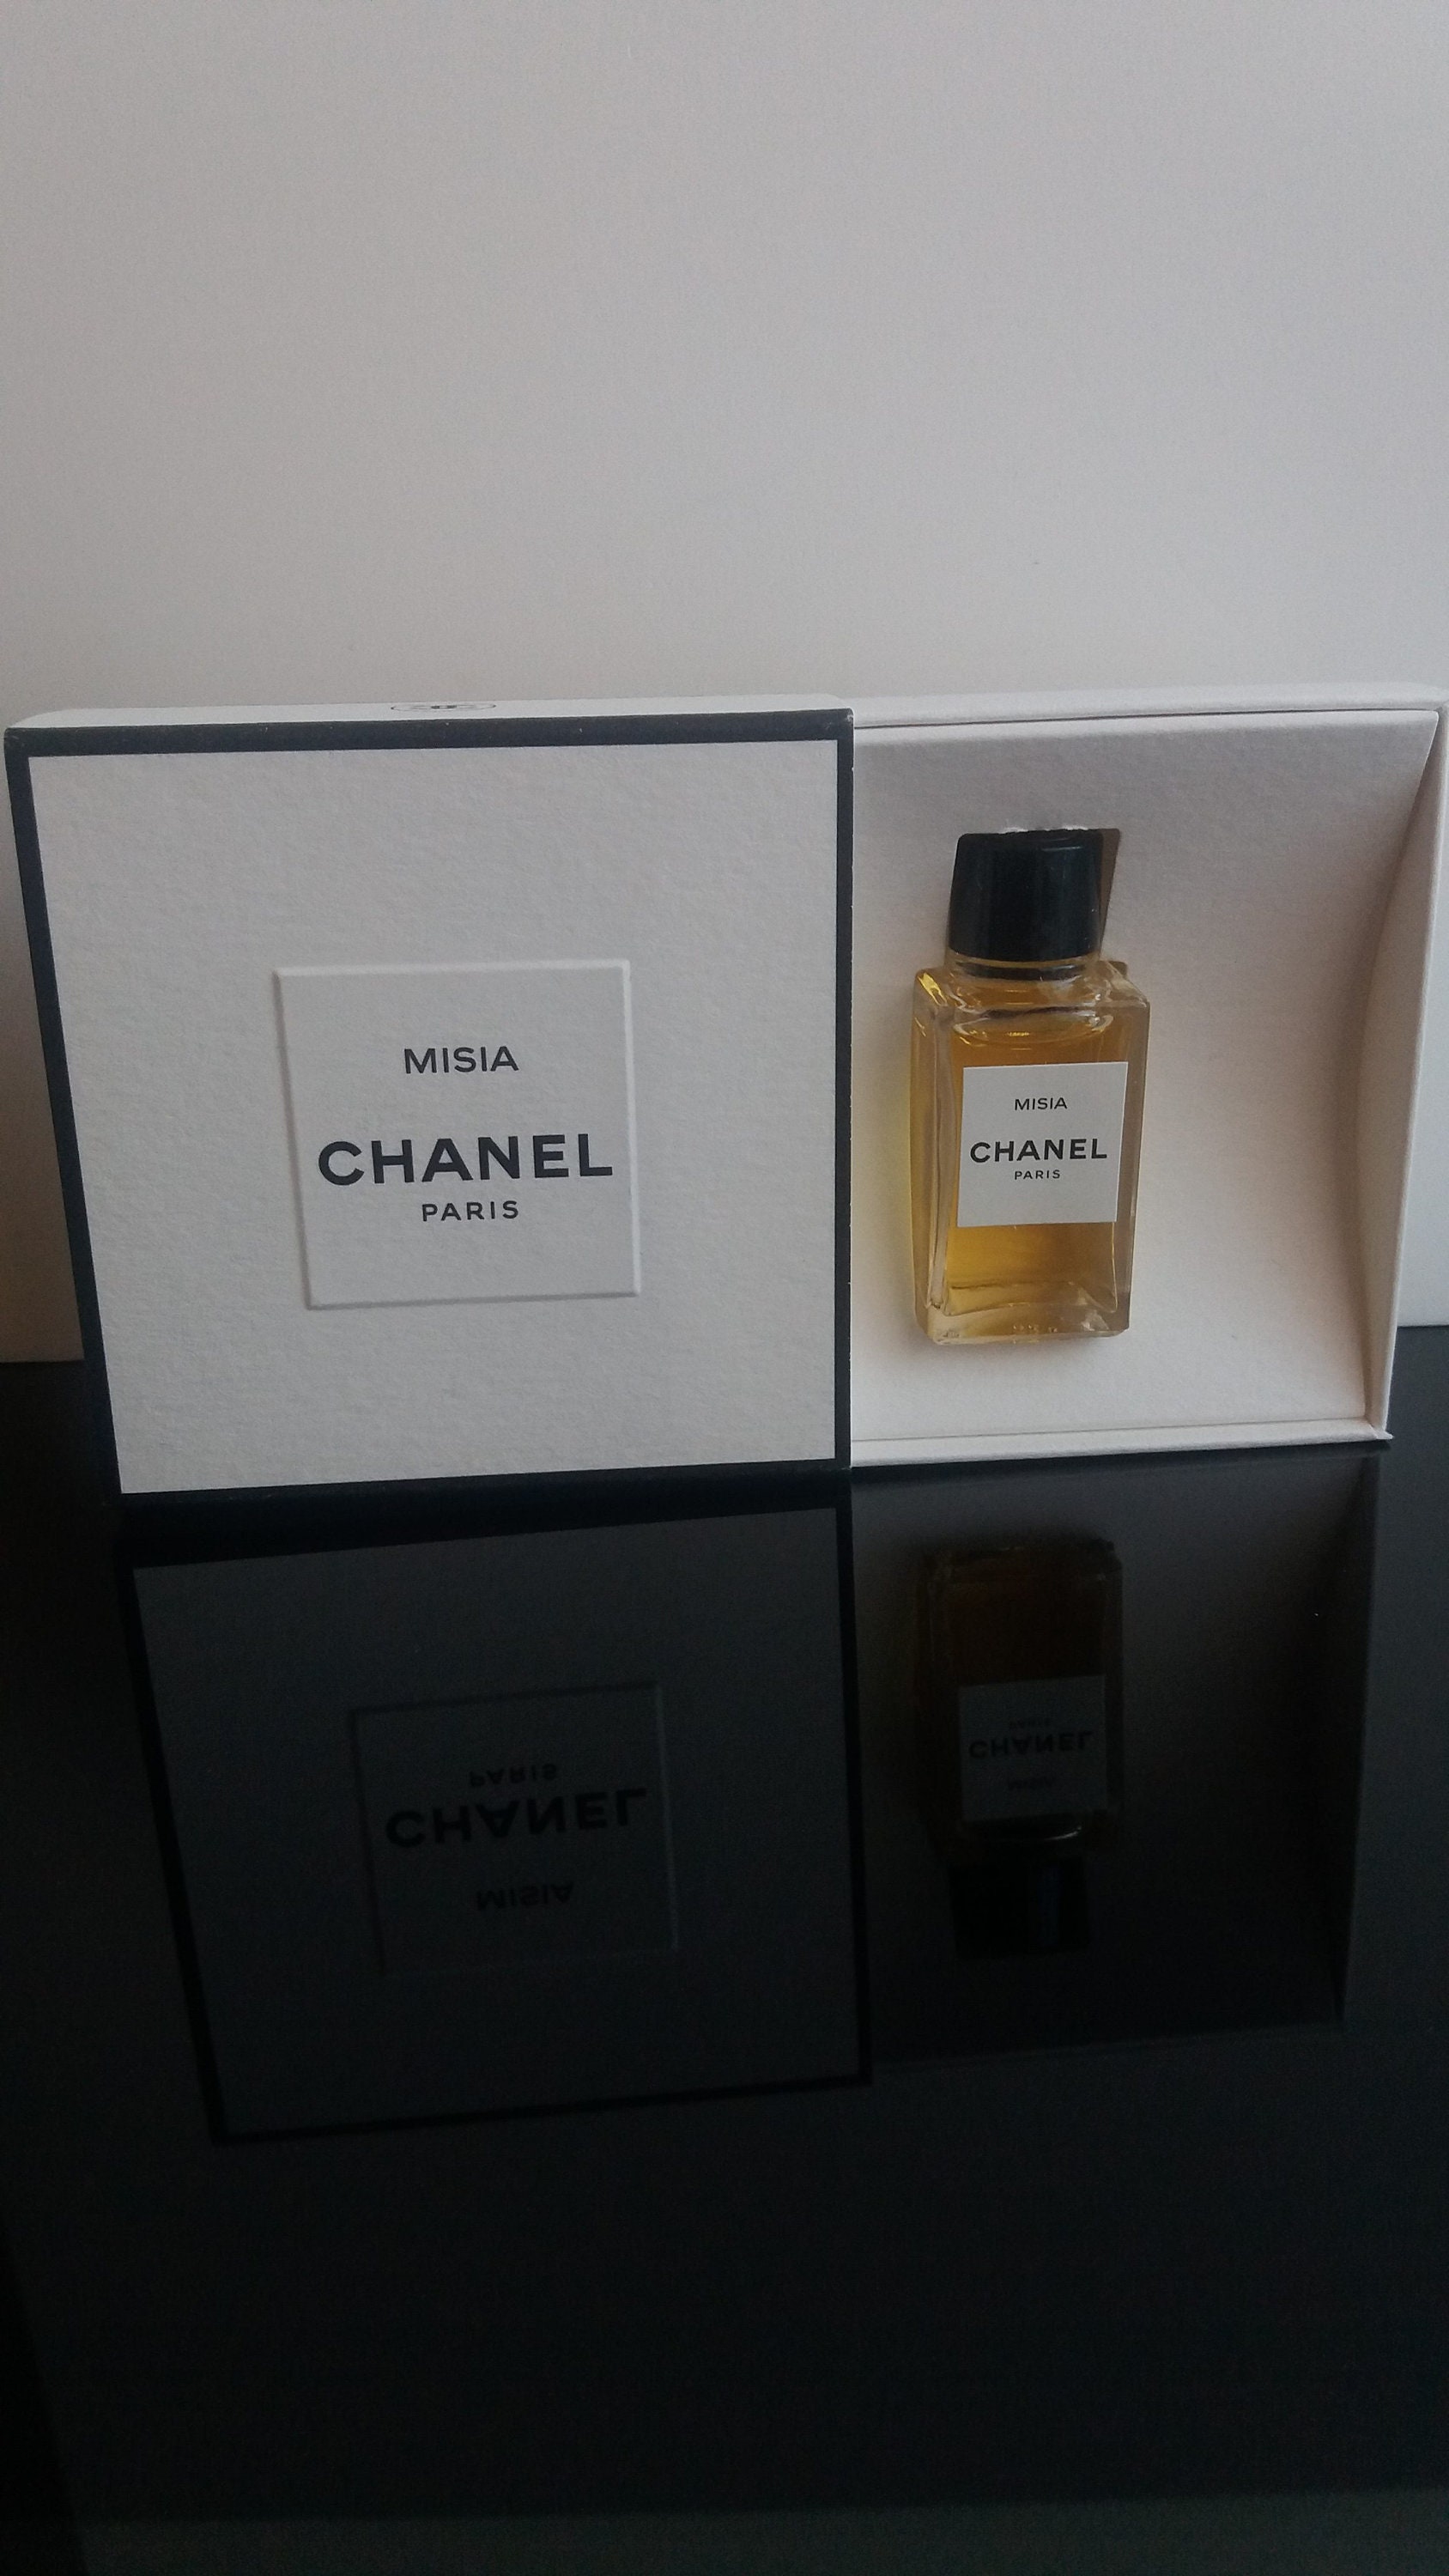 Le Lion de Chanel, the newest oriental fragrance from Chanel is here